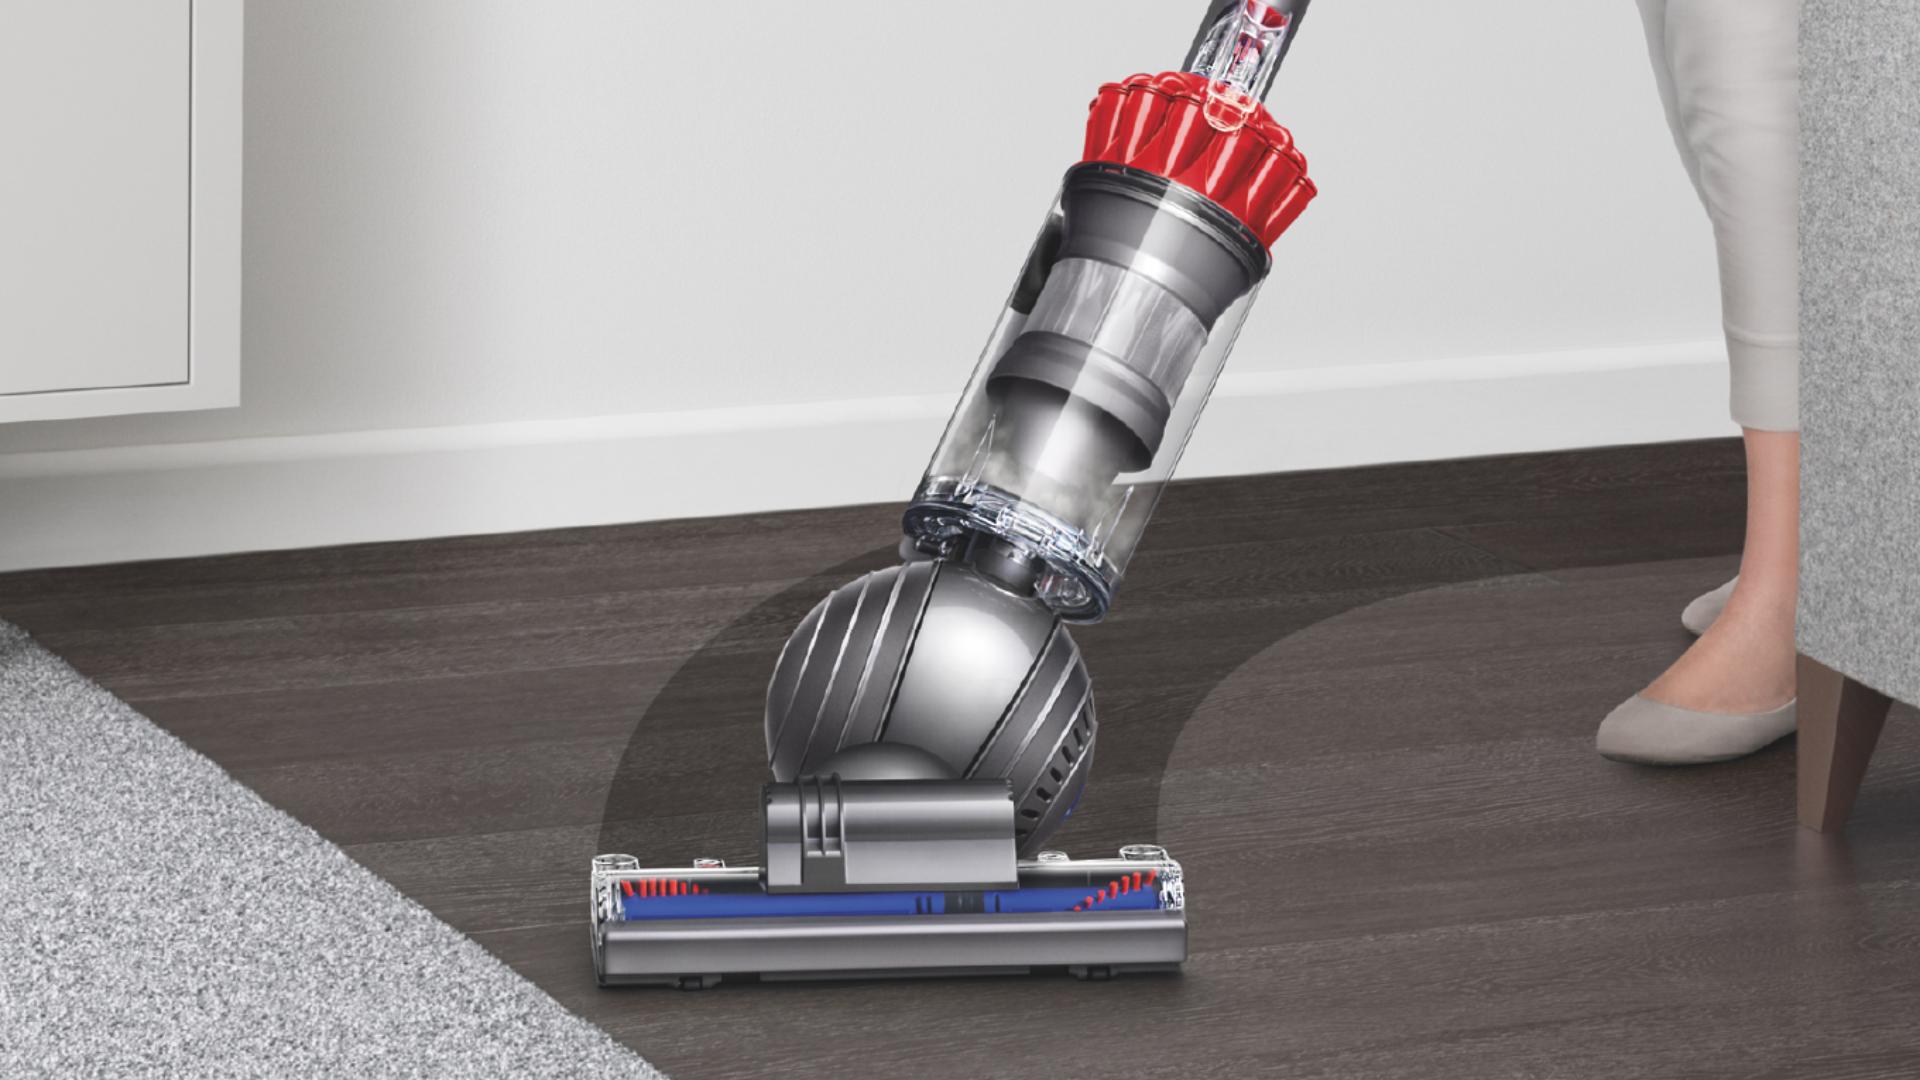 Upright vacuum cleaner being steered in a sweeping arc across a black hard floor surface. 